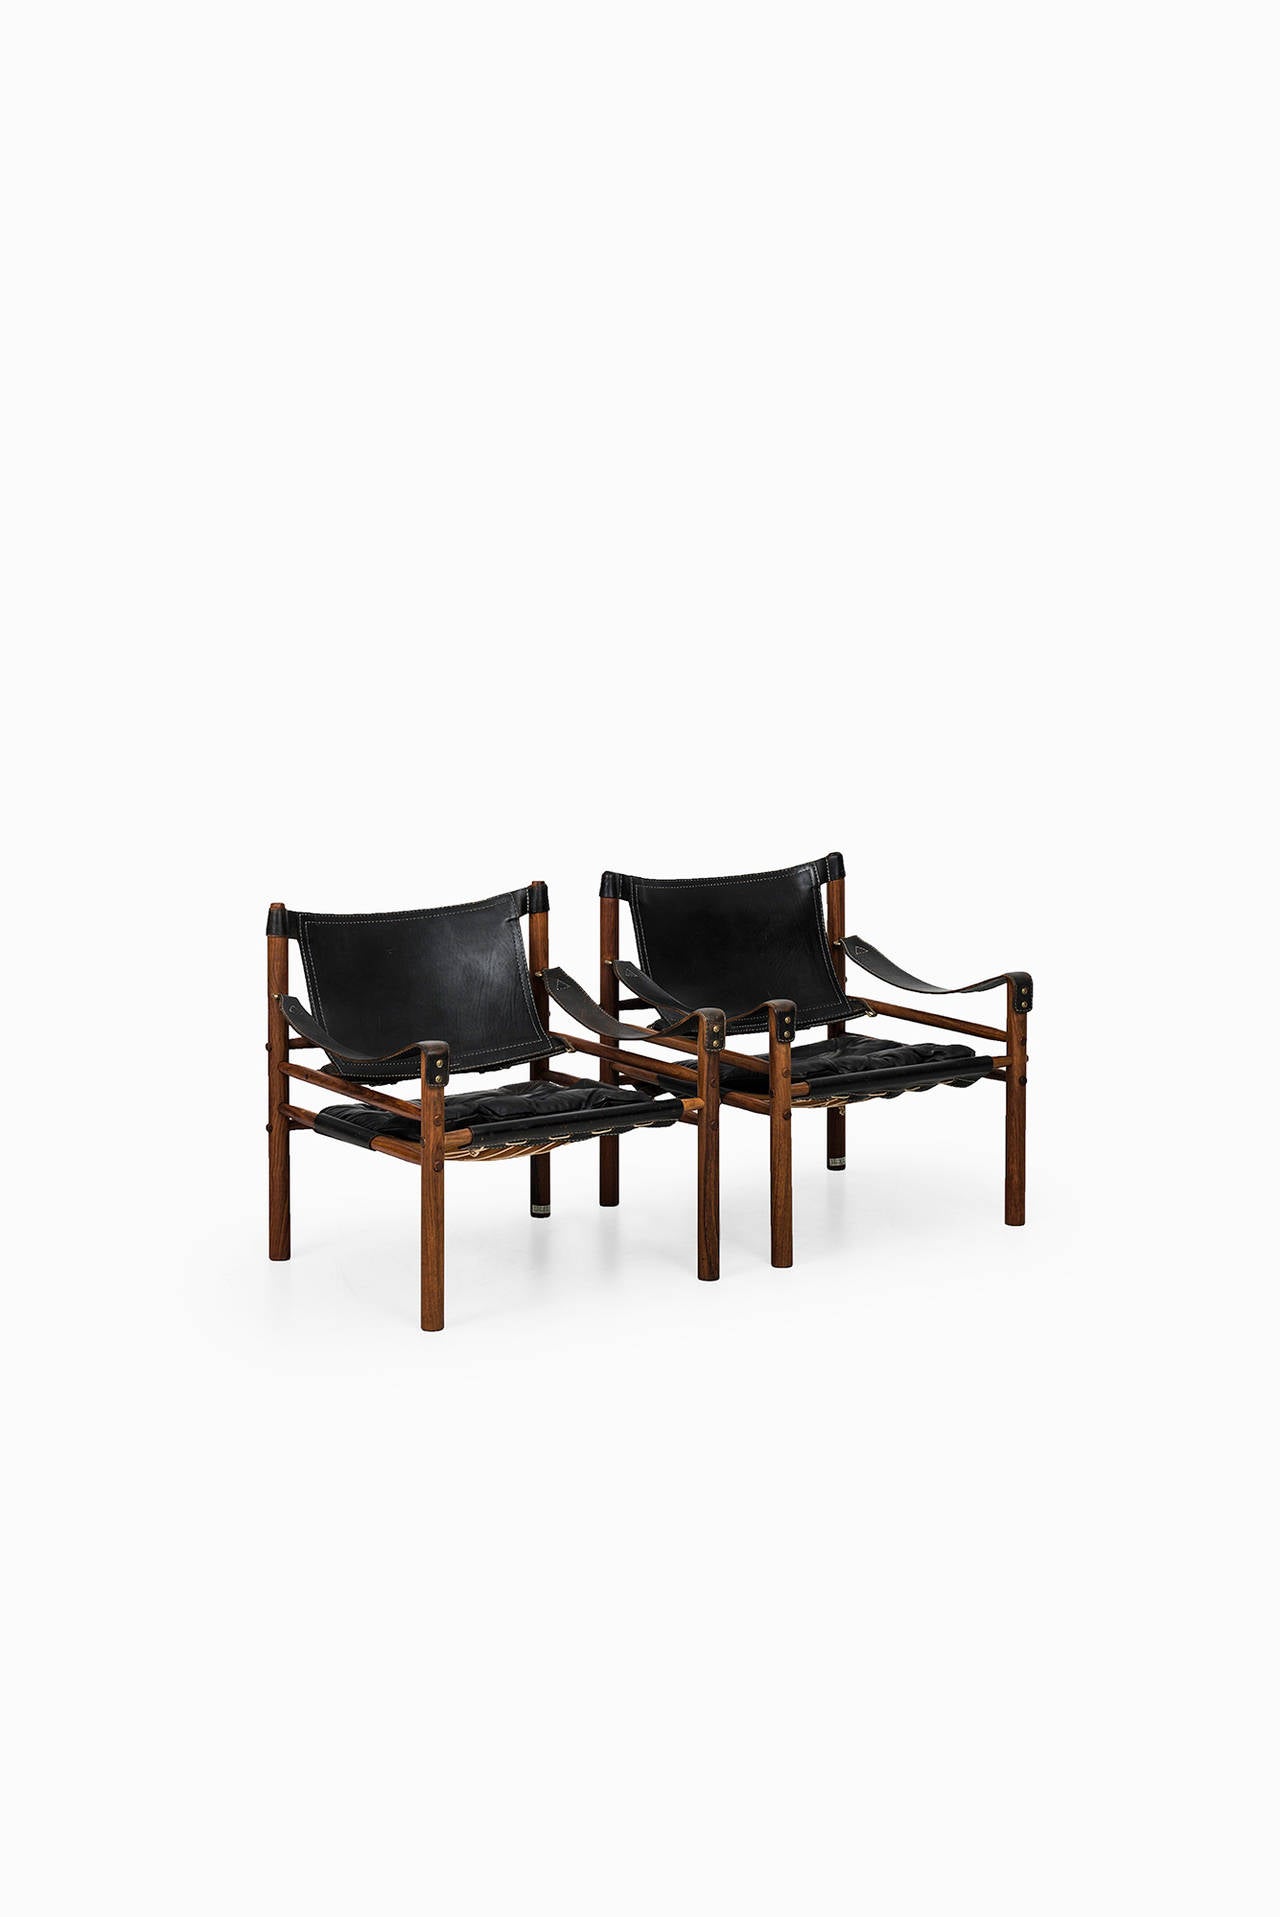 A pair of easy chairs model Sirocco or Scirocco designed by Arne Norell. Produced by Arne Norell AB in Aneby, Sweden.